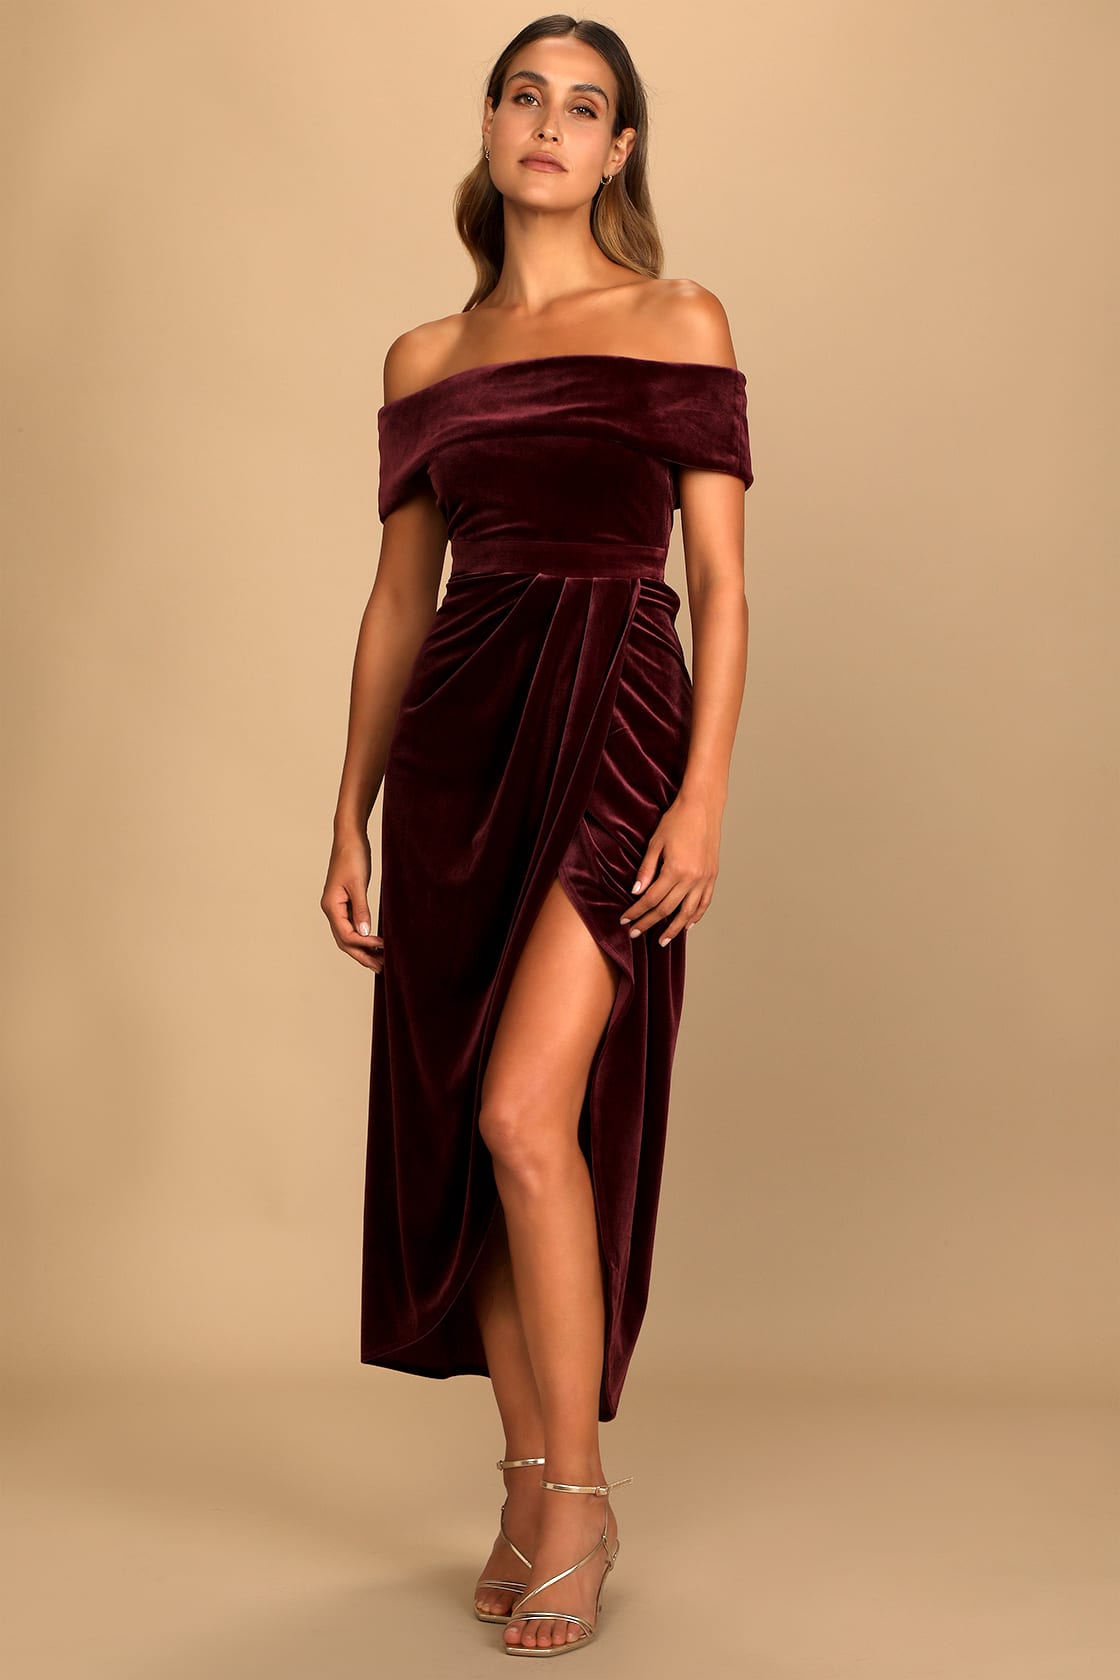 new years eve wedding guest dress